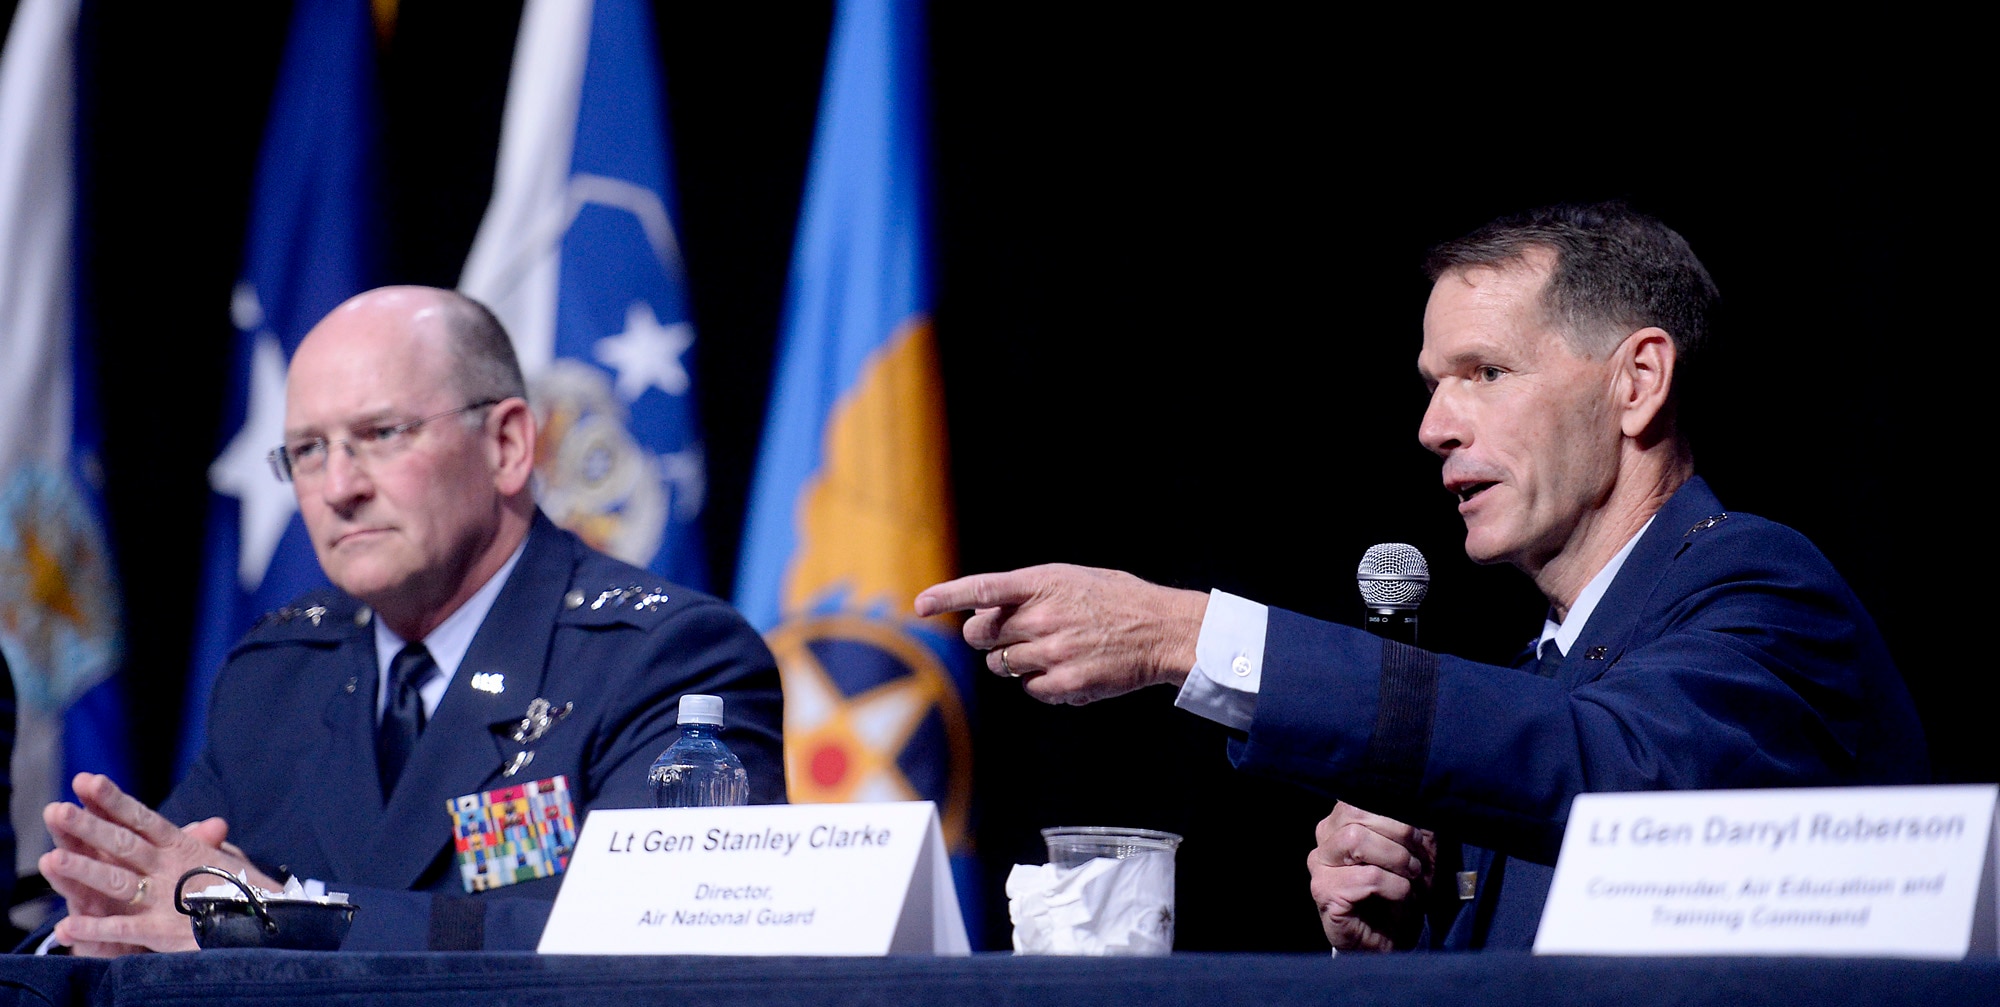 Lt. Gen. Stanley E. Clarke III, the Air National Guard director, answers questions with fellow major command panelists during a Q-and-A session at Air Force Association's Air and Space Conference and Technology Exposition Sept. 16, 2015, in Washington, D.C. (U.S. Air Force photo/Scott M. Ash)  